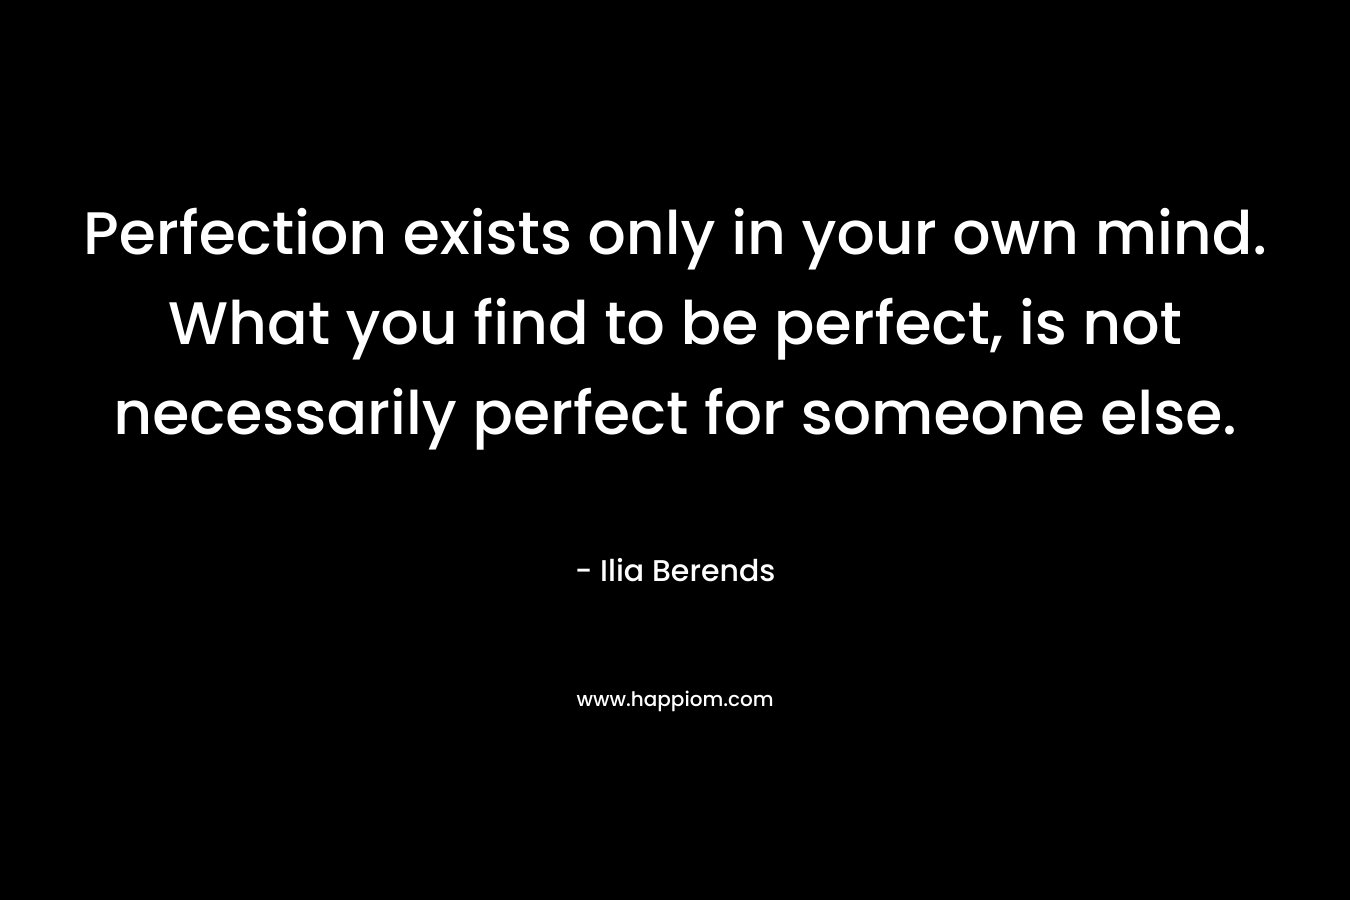 Perfection exists only in your own mind. What you find to be perfect, is not necessarily perfect for someone else. – Ilia Berends